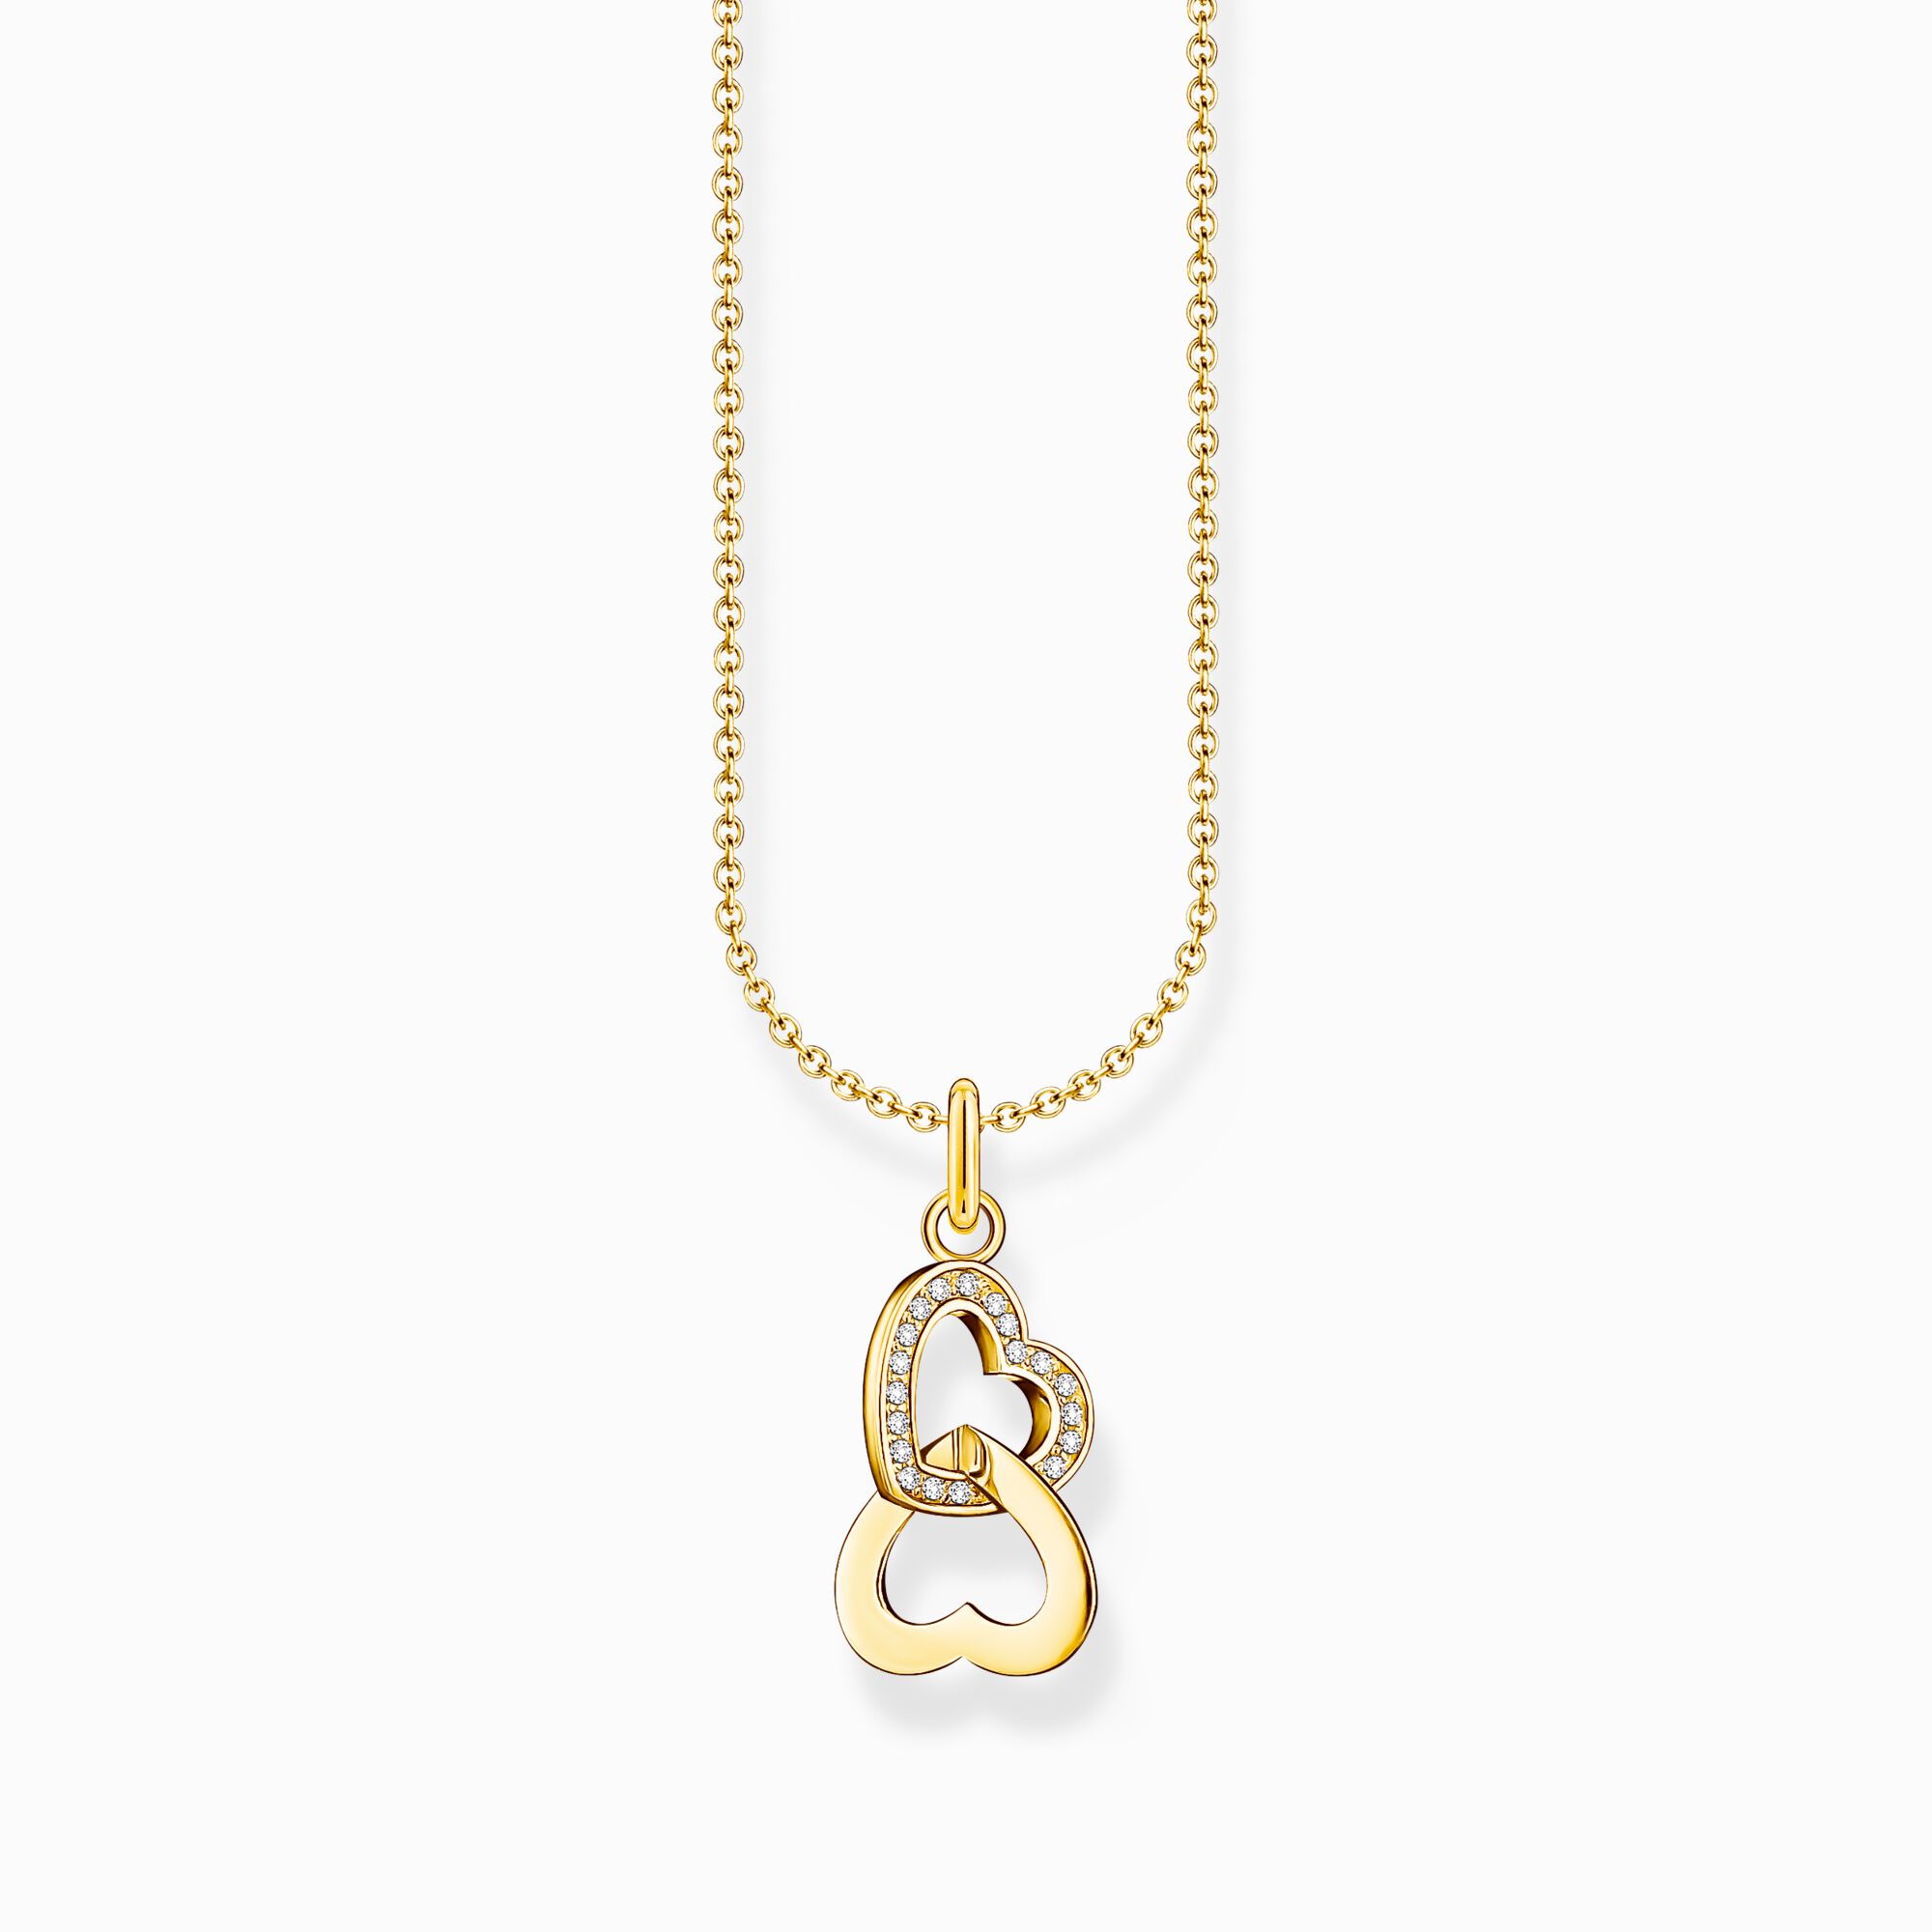 Gold-plated necklace with intertwined hearts pendant from the Charming Collection collection in the THOMAS SABO online store